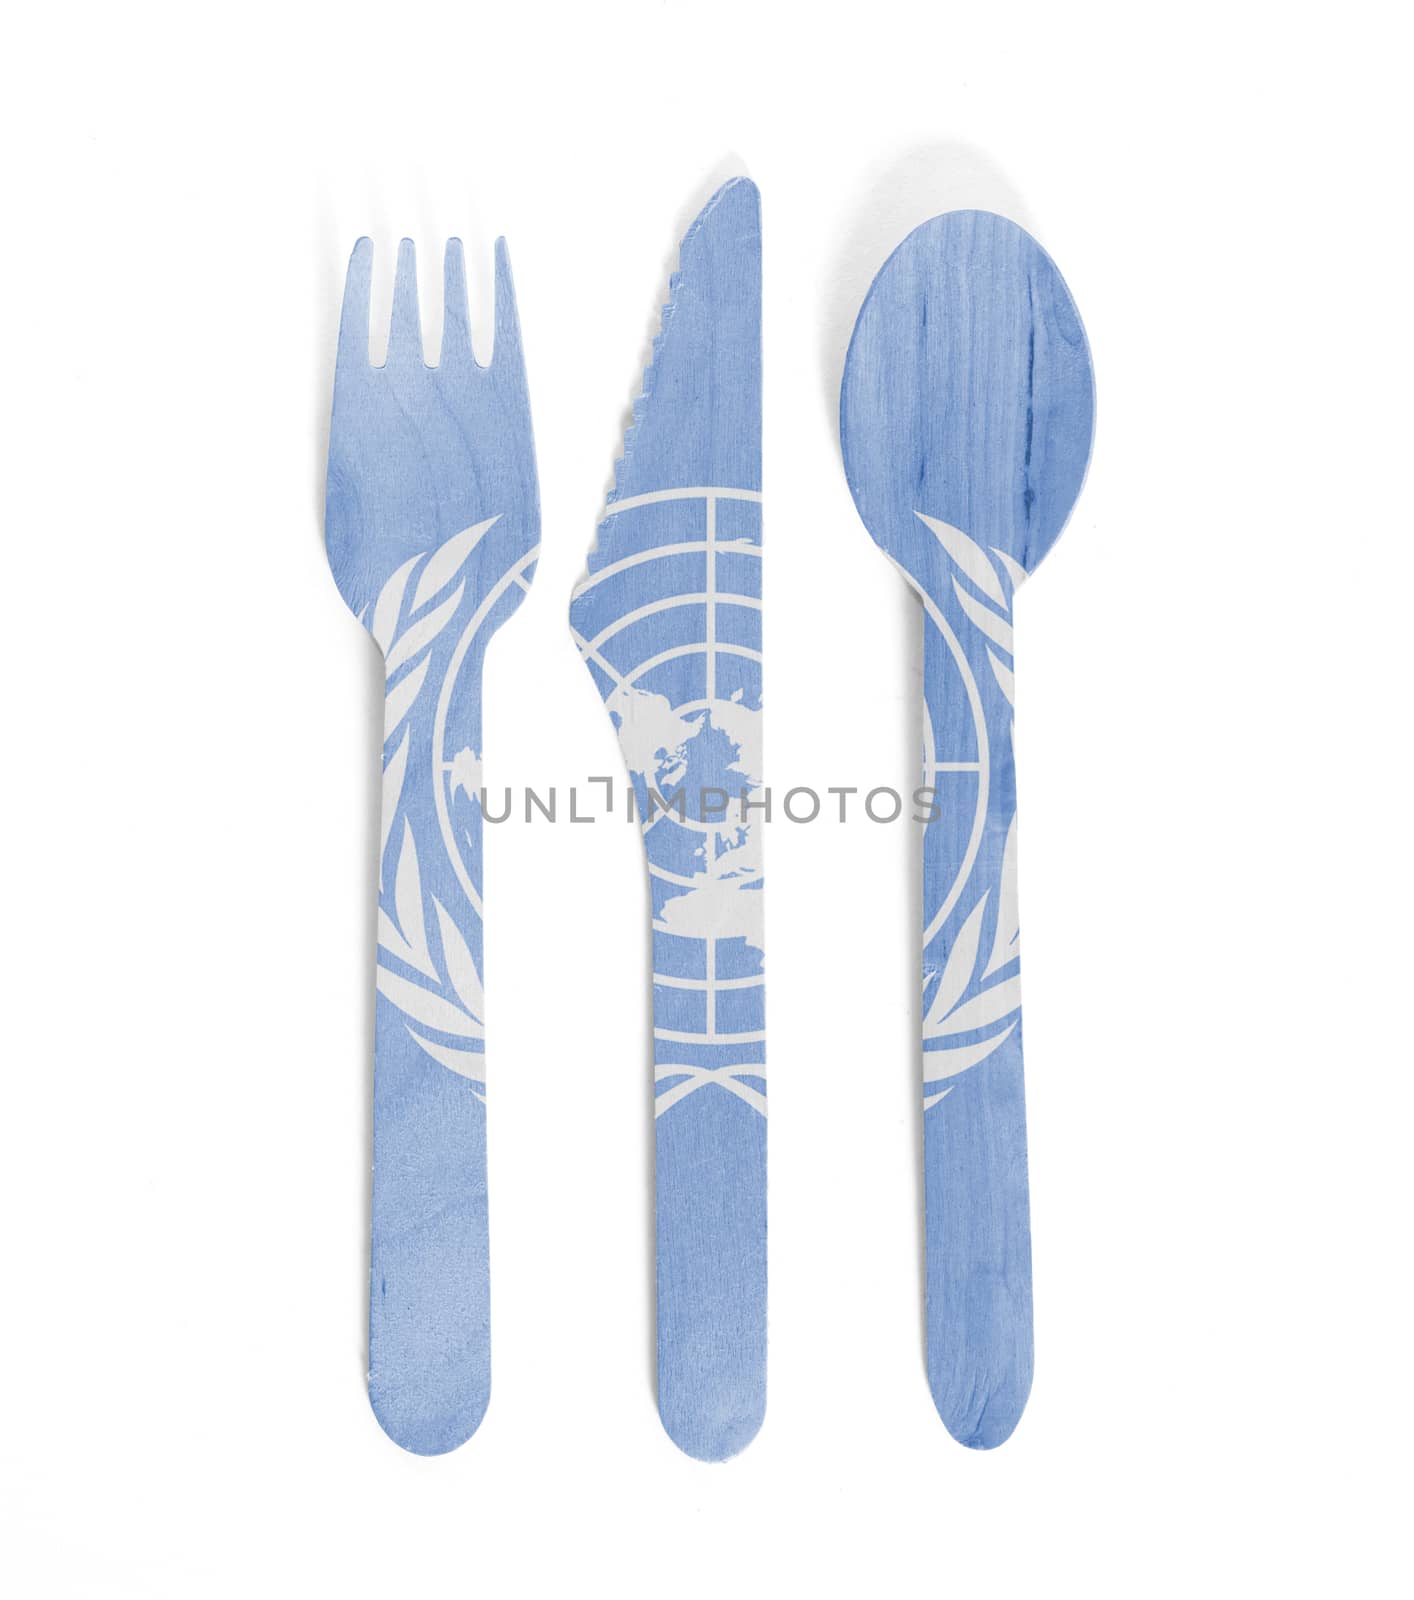 Eco friendly wooden cutlery - Plastic free concept - Isolated - Flag of United Nations